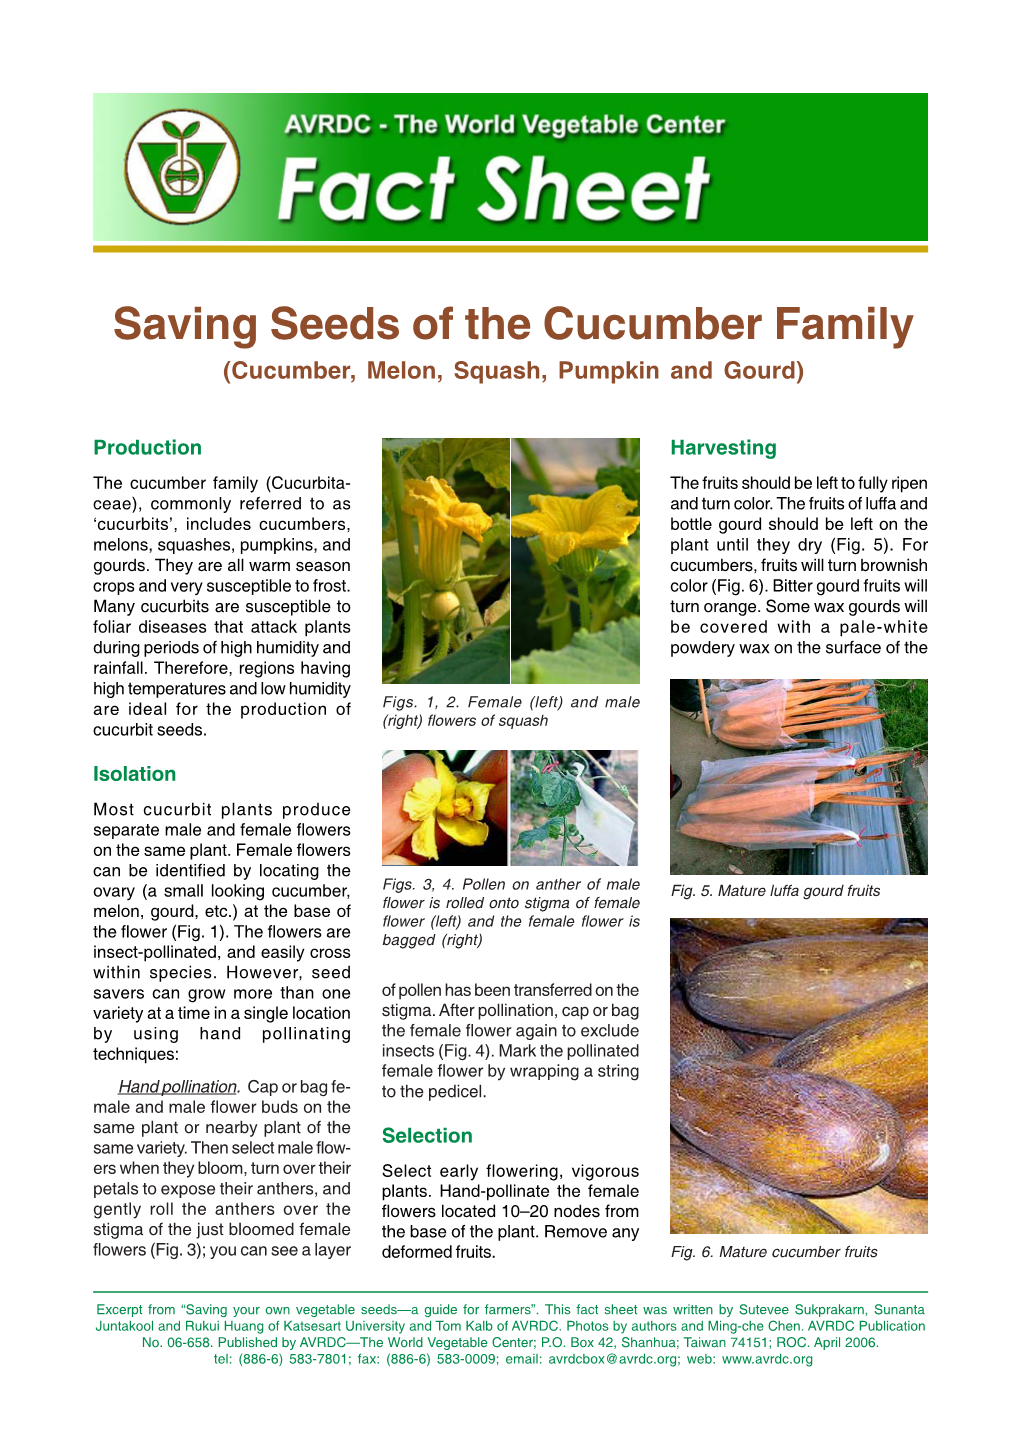 Saving Seeds of the Cucumber Family (Cucumber, Melon, Squash, Pumpkin and Gourd)